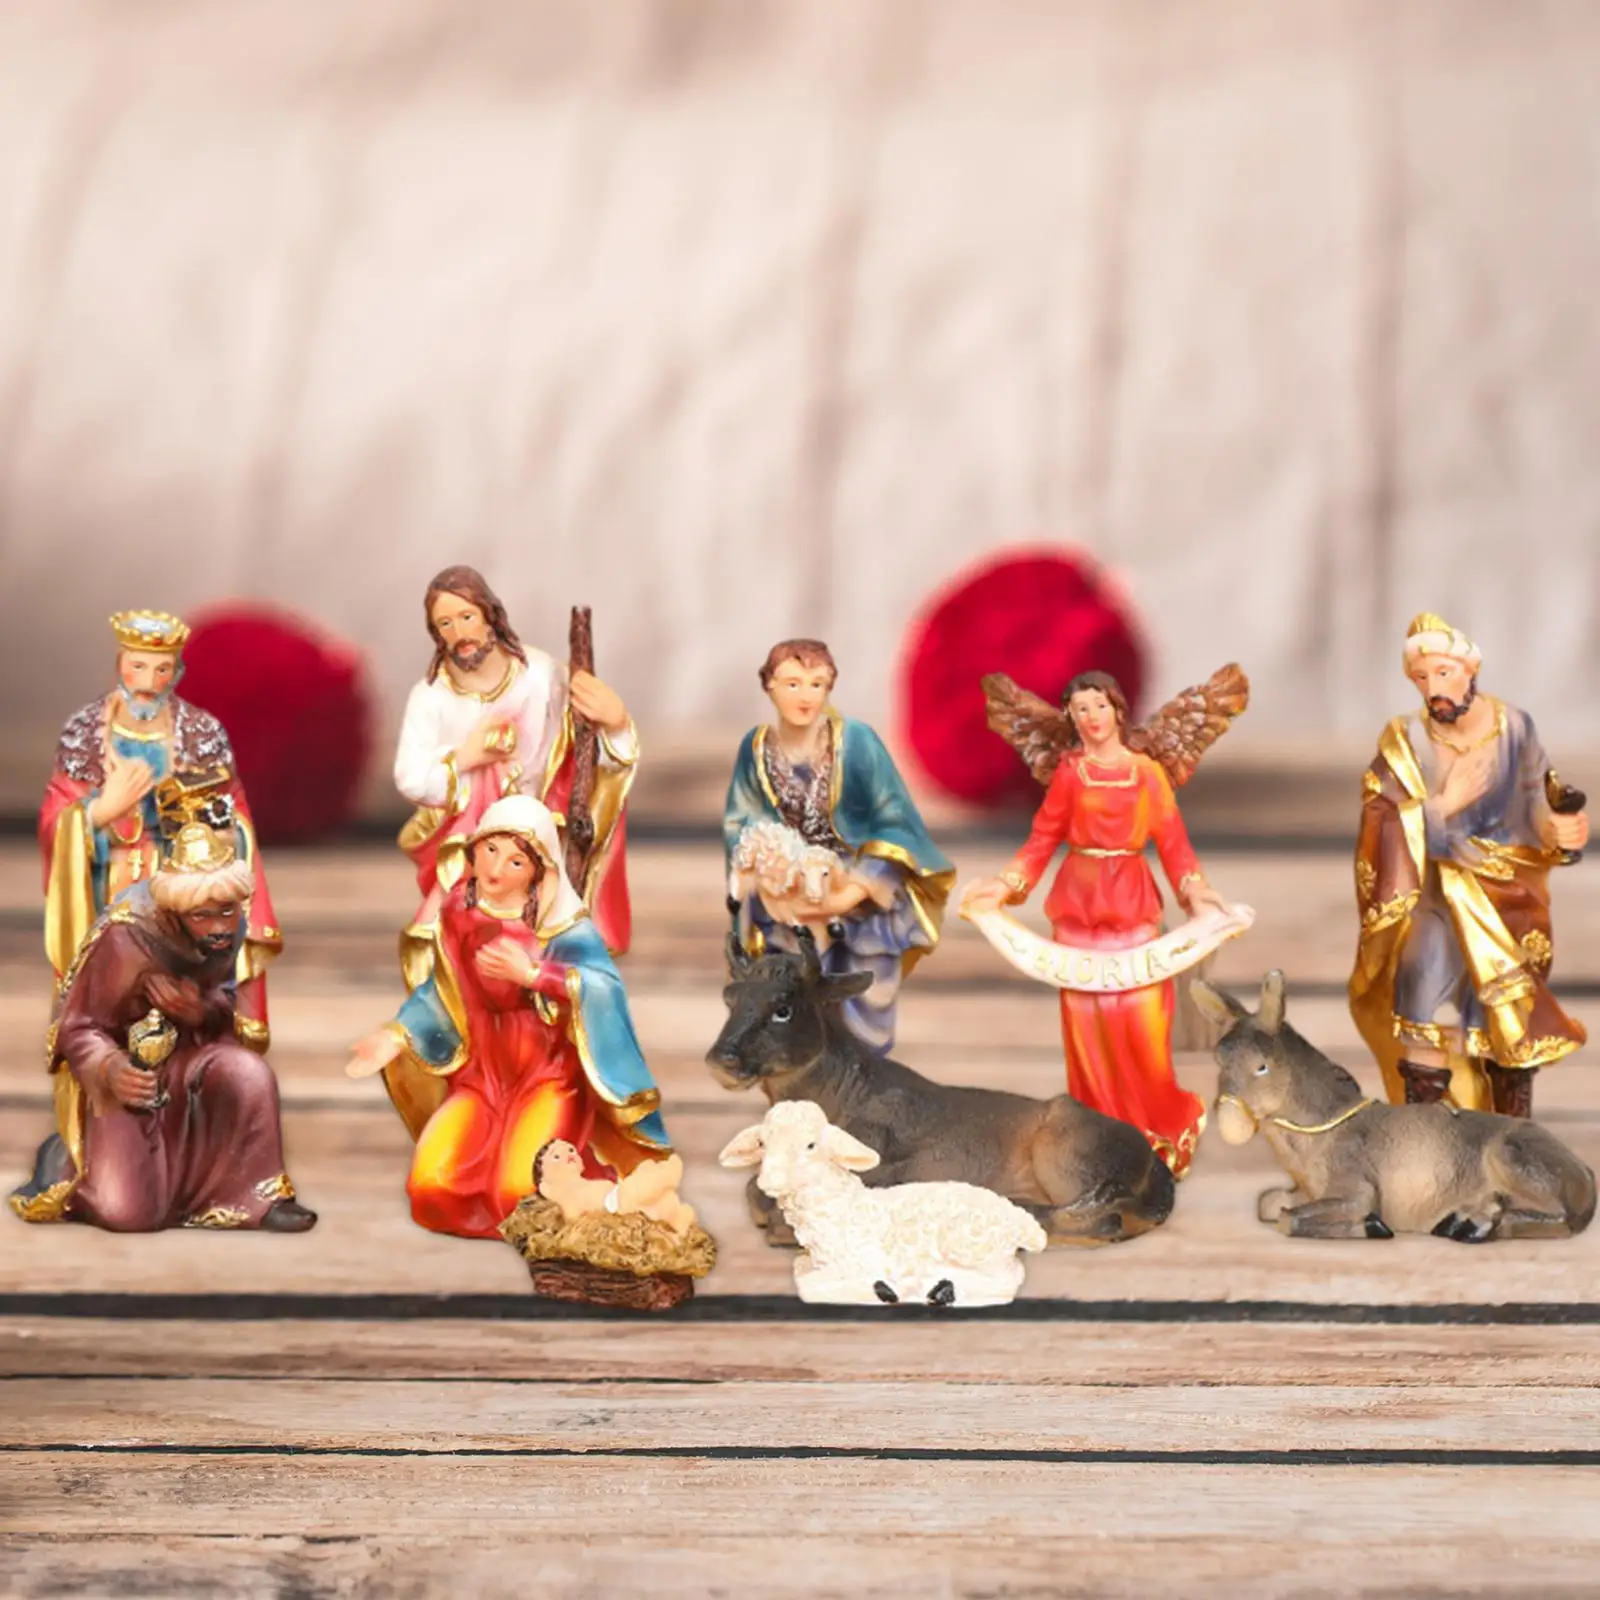 11 Pieces Nativity Scene Figurines Christmas for Office Shelf Table